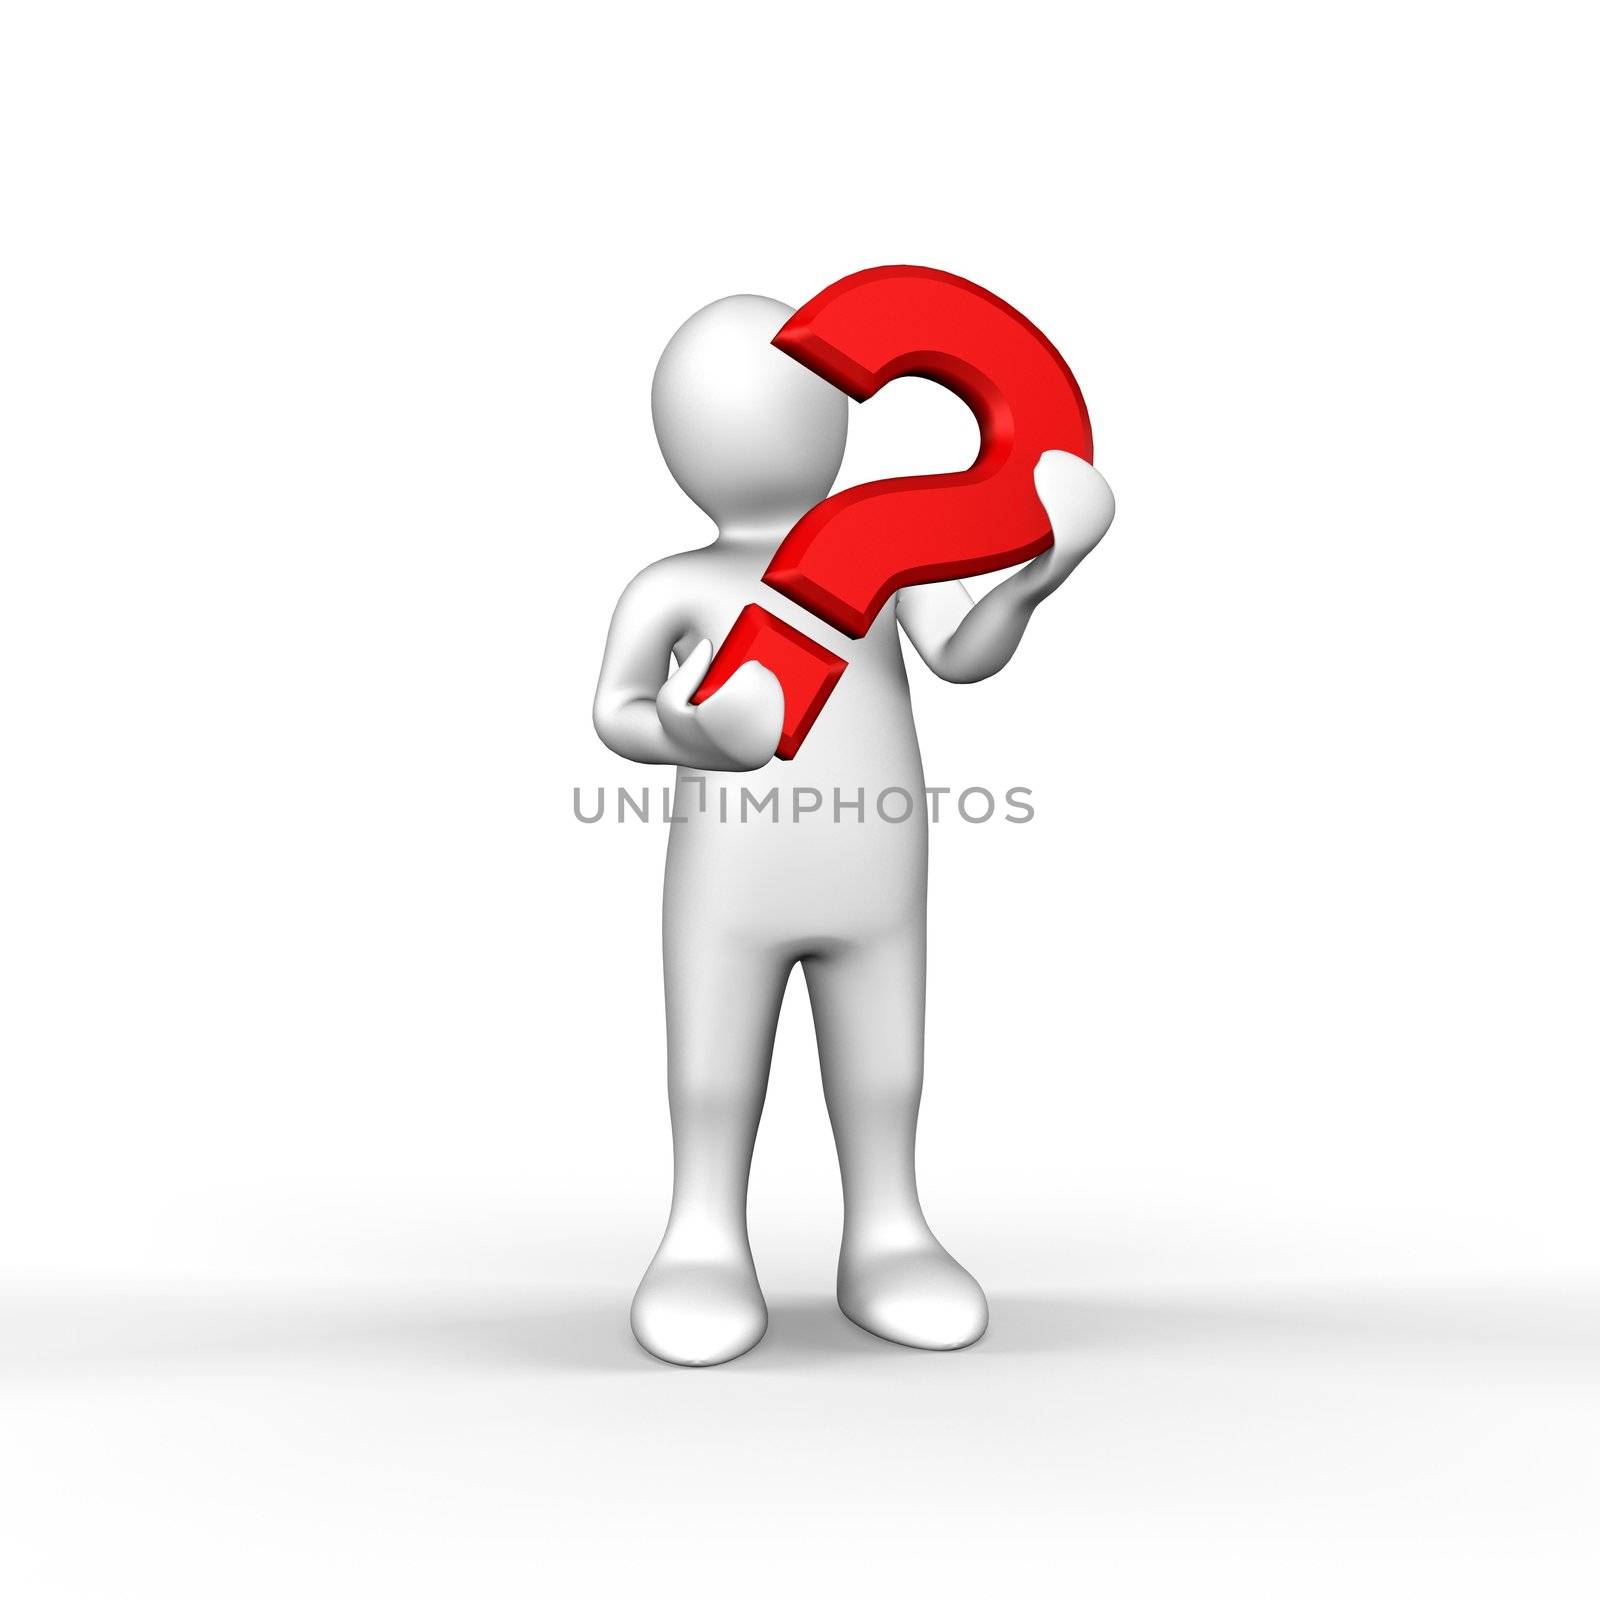 Illustrated white figure holding red question mark by Wavebreakmedia